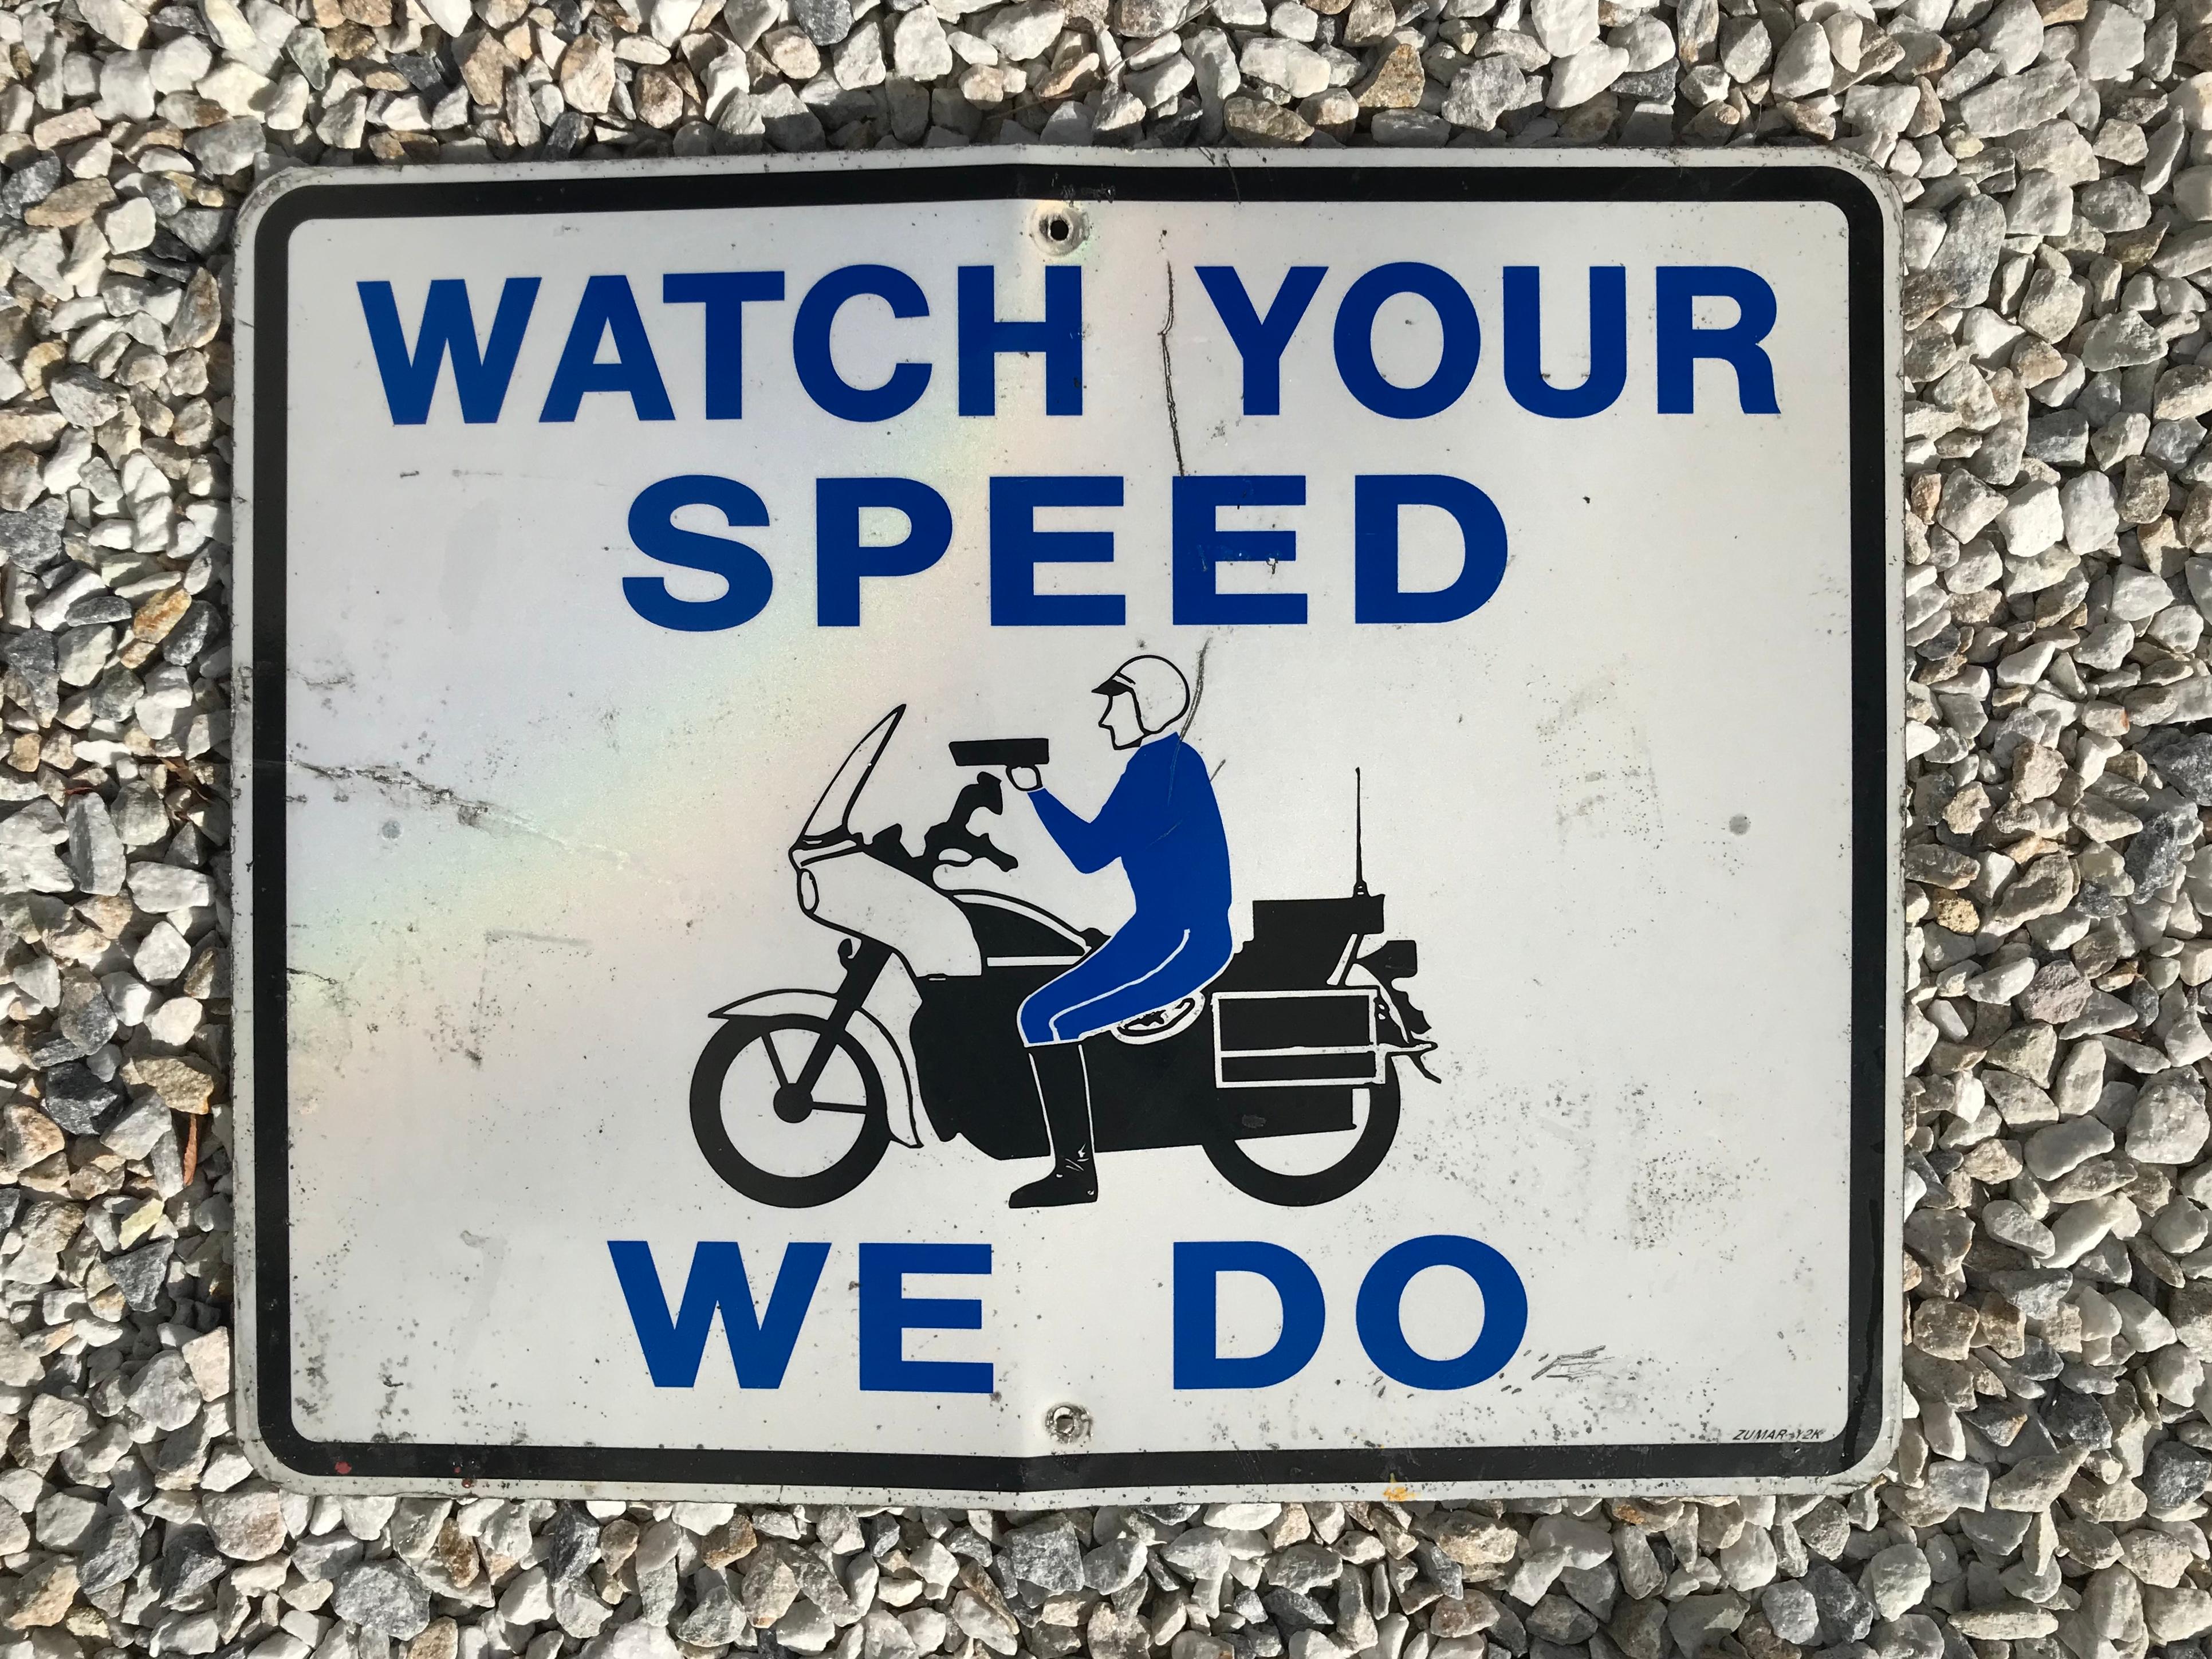 Cool vintage California highway sign. Sign reads - Watch Your Speed We Do featuring a police officer riding a motorcycle in the middle. White reflective steel sign with blue lettering. Great graphics. Some bends to metal and staining on front.